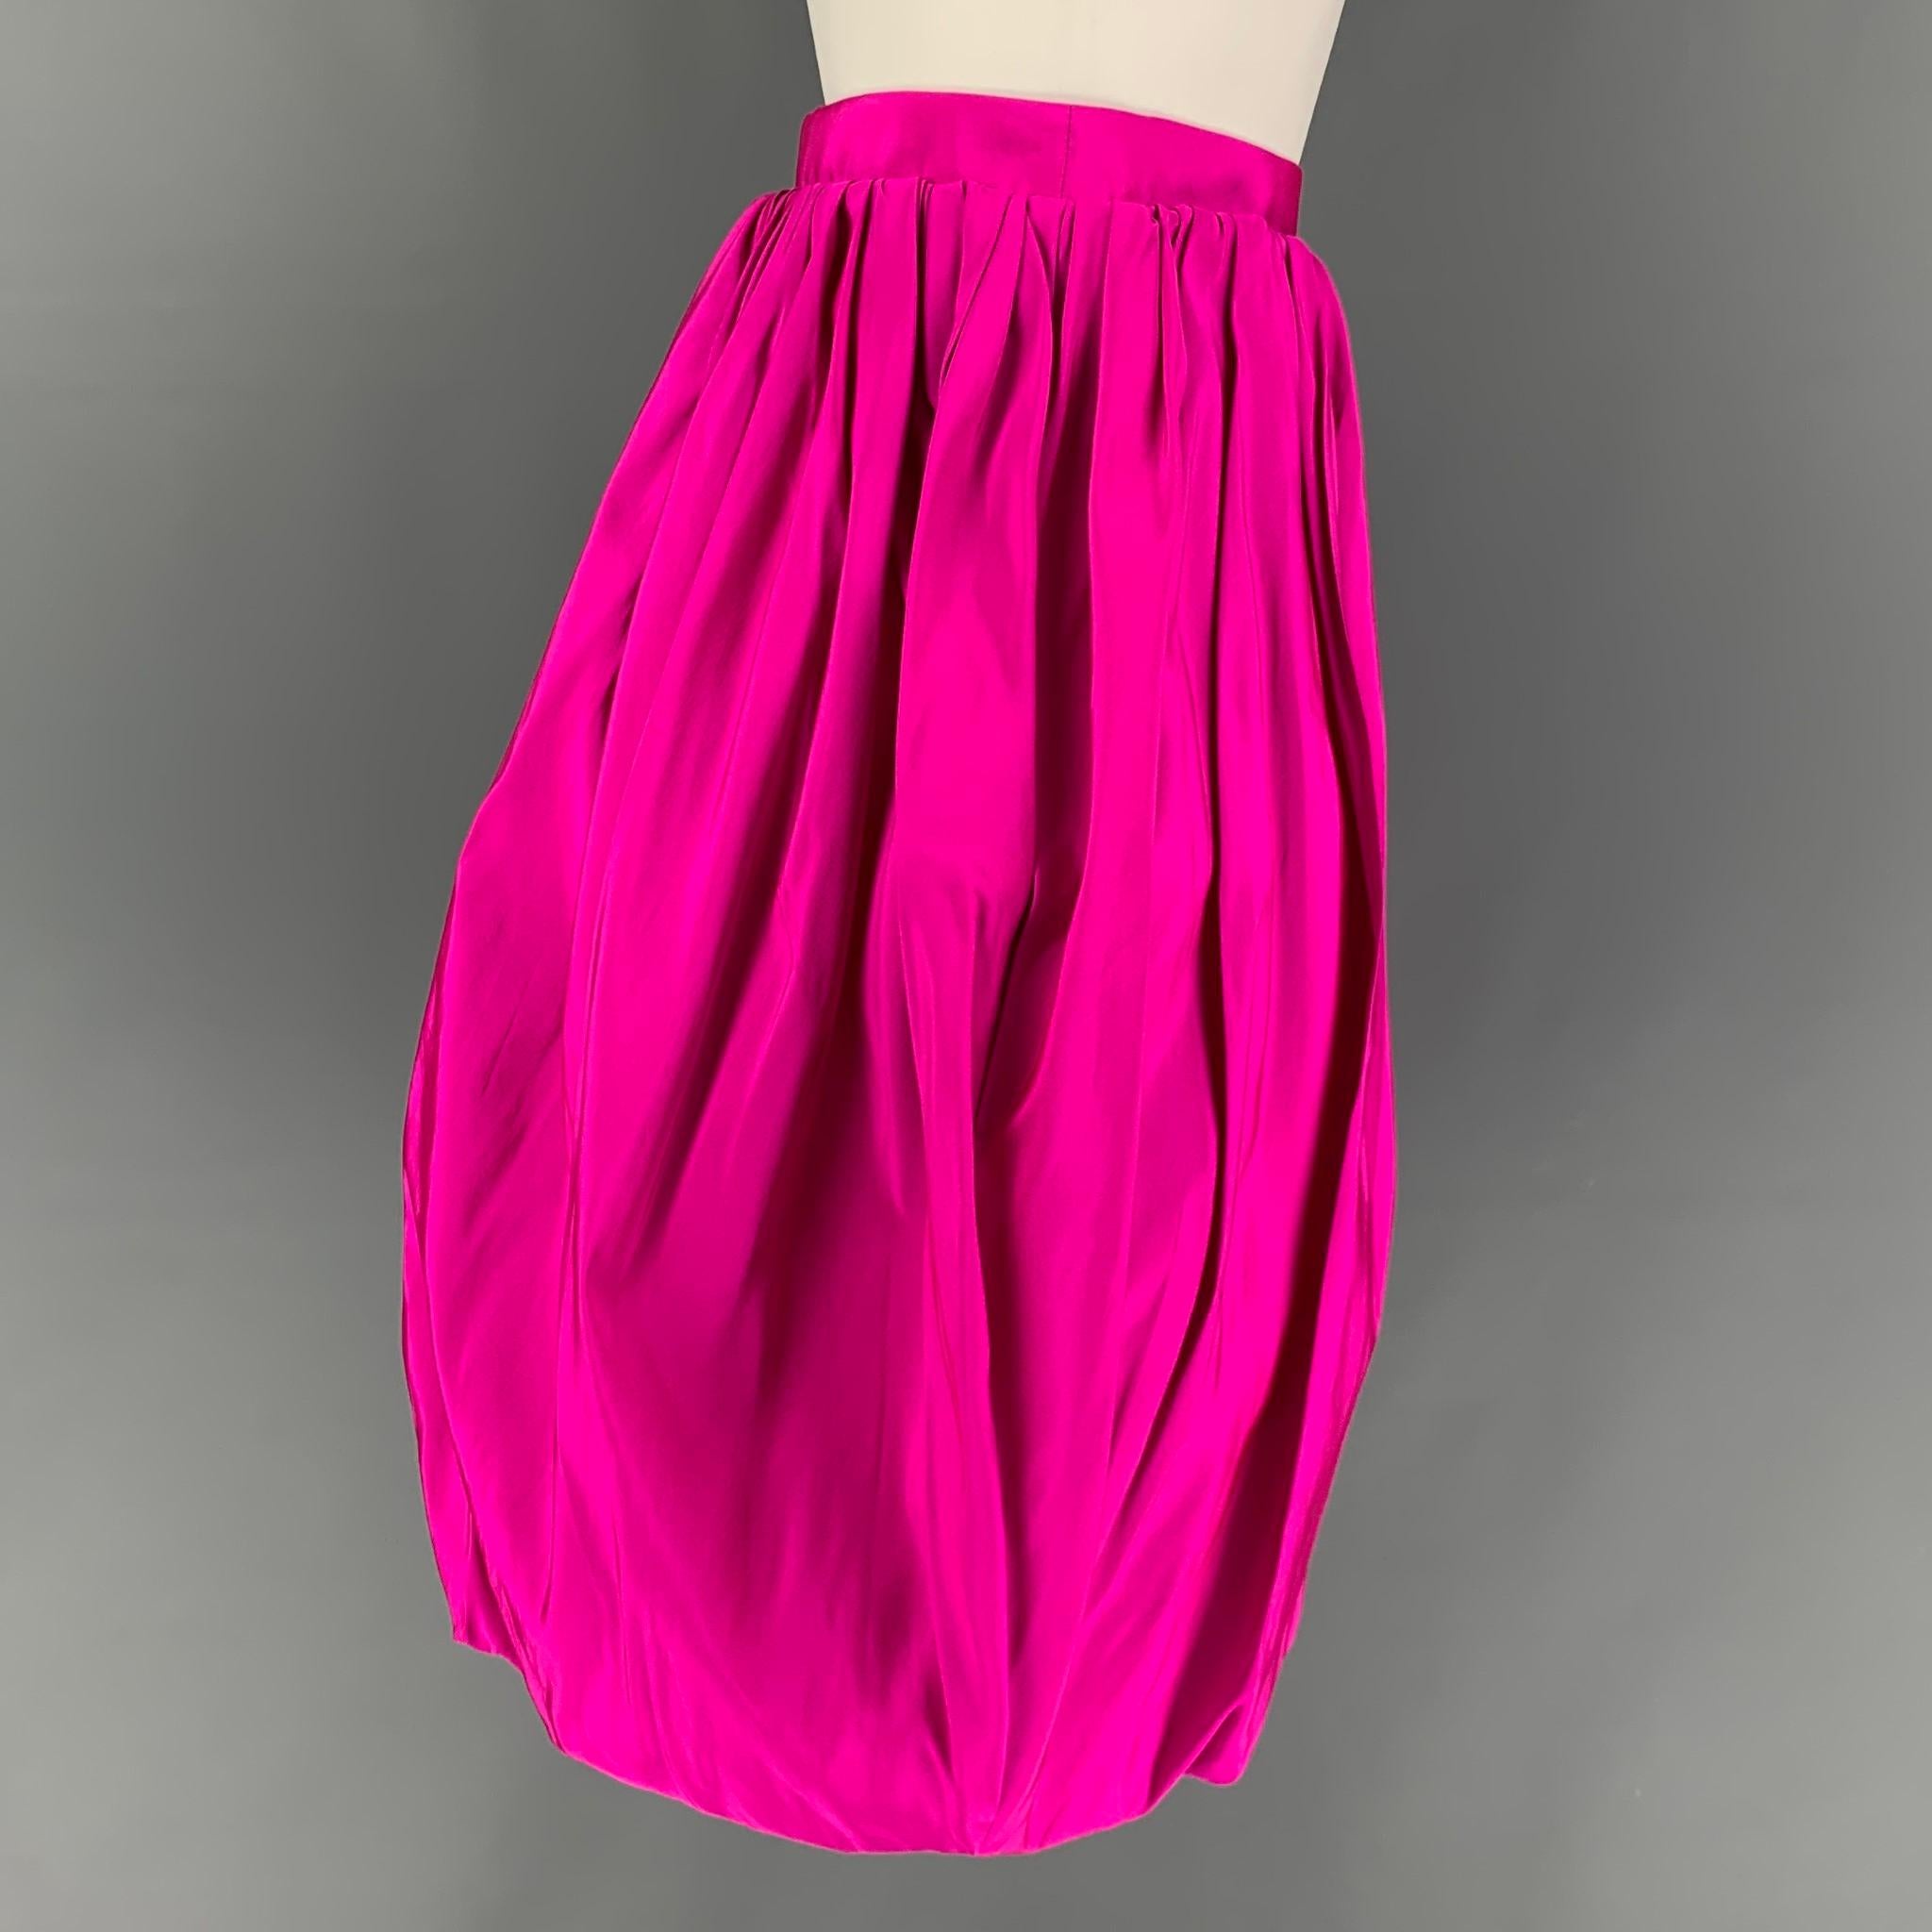 CALVIN KLEIN 205W39NYC skirt comes in a pink silk featuring a pleated style, elastic detail, and a side front tab & snap button closure. Made in Italy. 

New With Tags. 
Marked: 2

Measurements:

Waist: 26 in.
Hip: 40 in.
Length: 23 in.
 